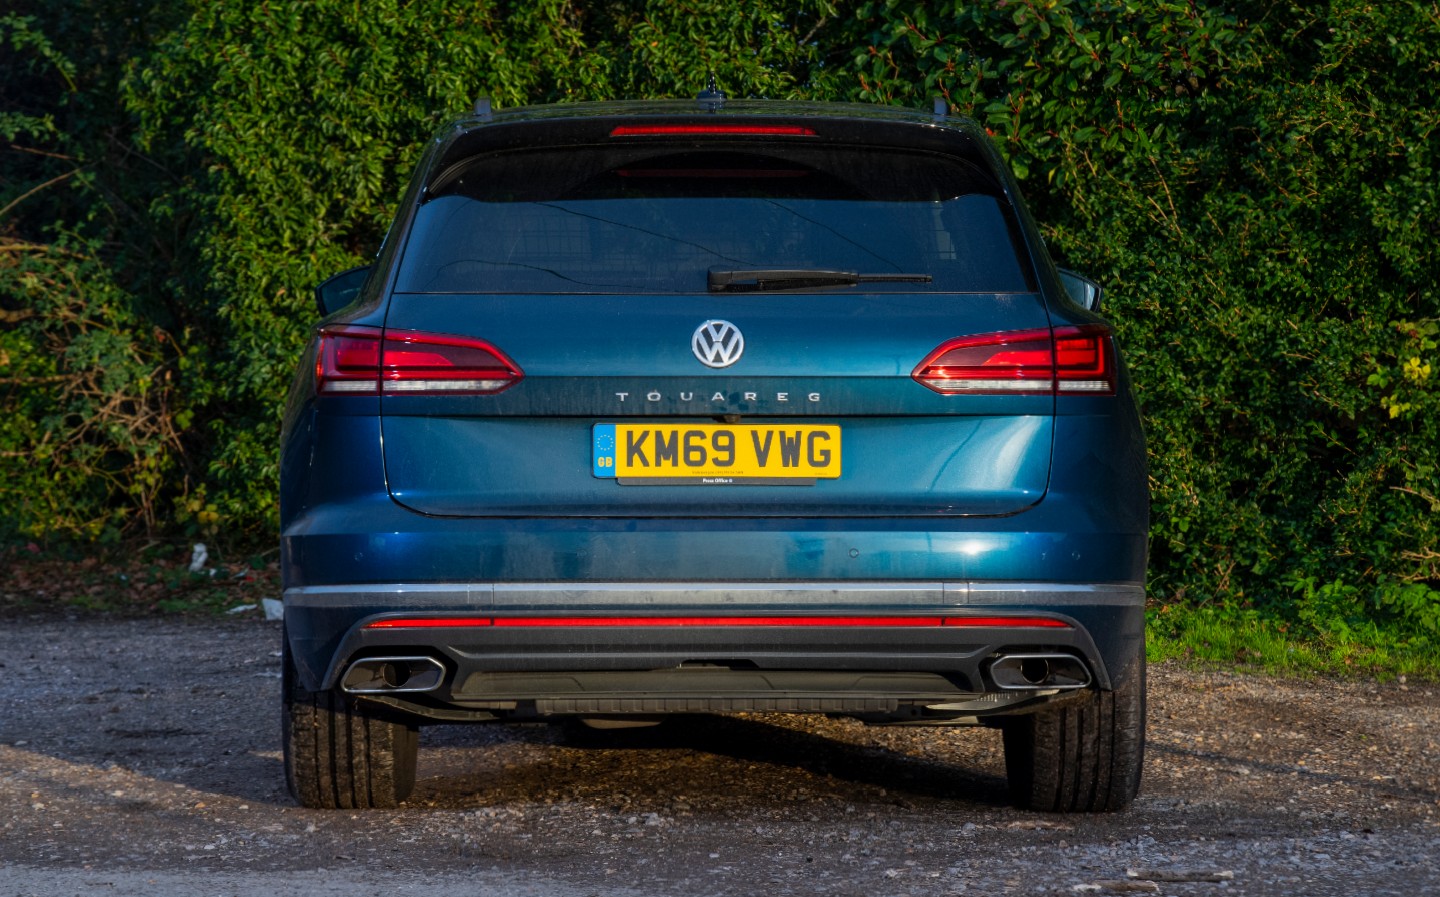 2020 Volkswagen Touareg SEL Tech long-term review by Tina Milton for Sunday Times Driving.co.uk